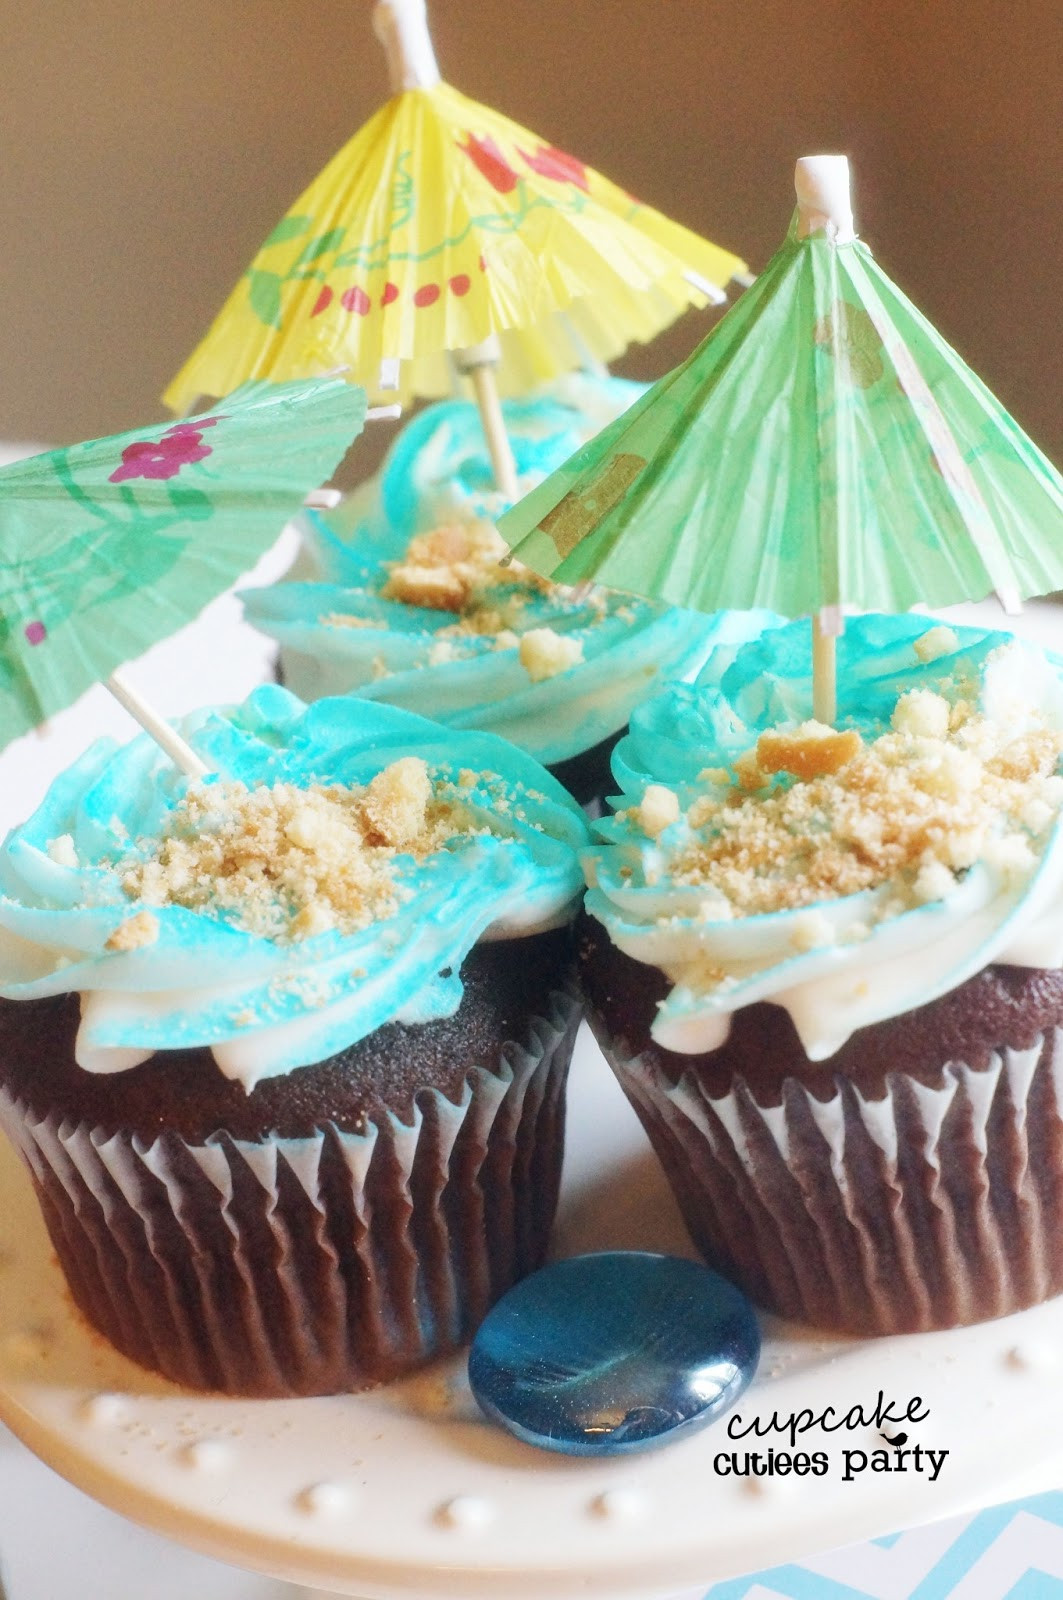 Beach Food Party Ideas
 Cupcake Cutiees Beach Party Pool Party Food Ideas